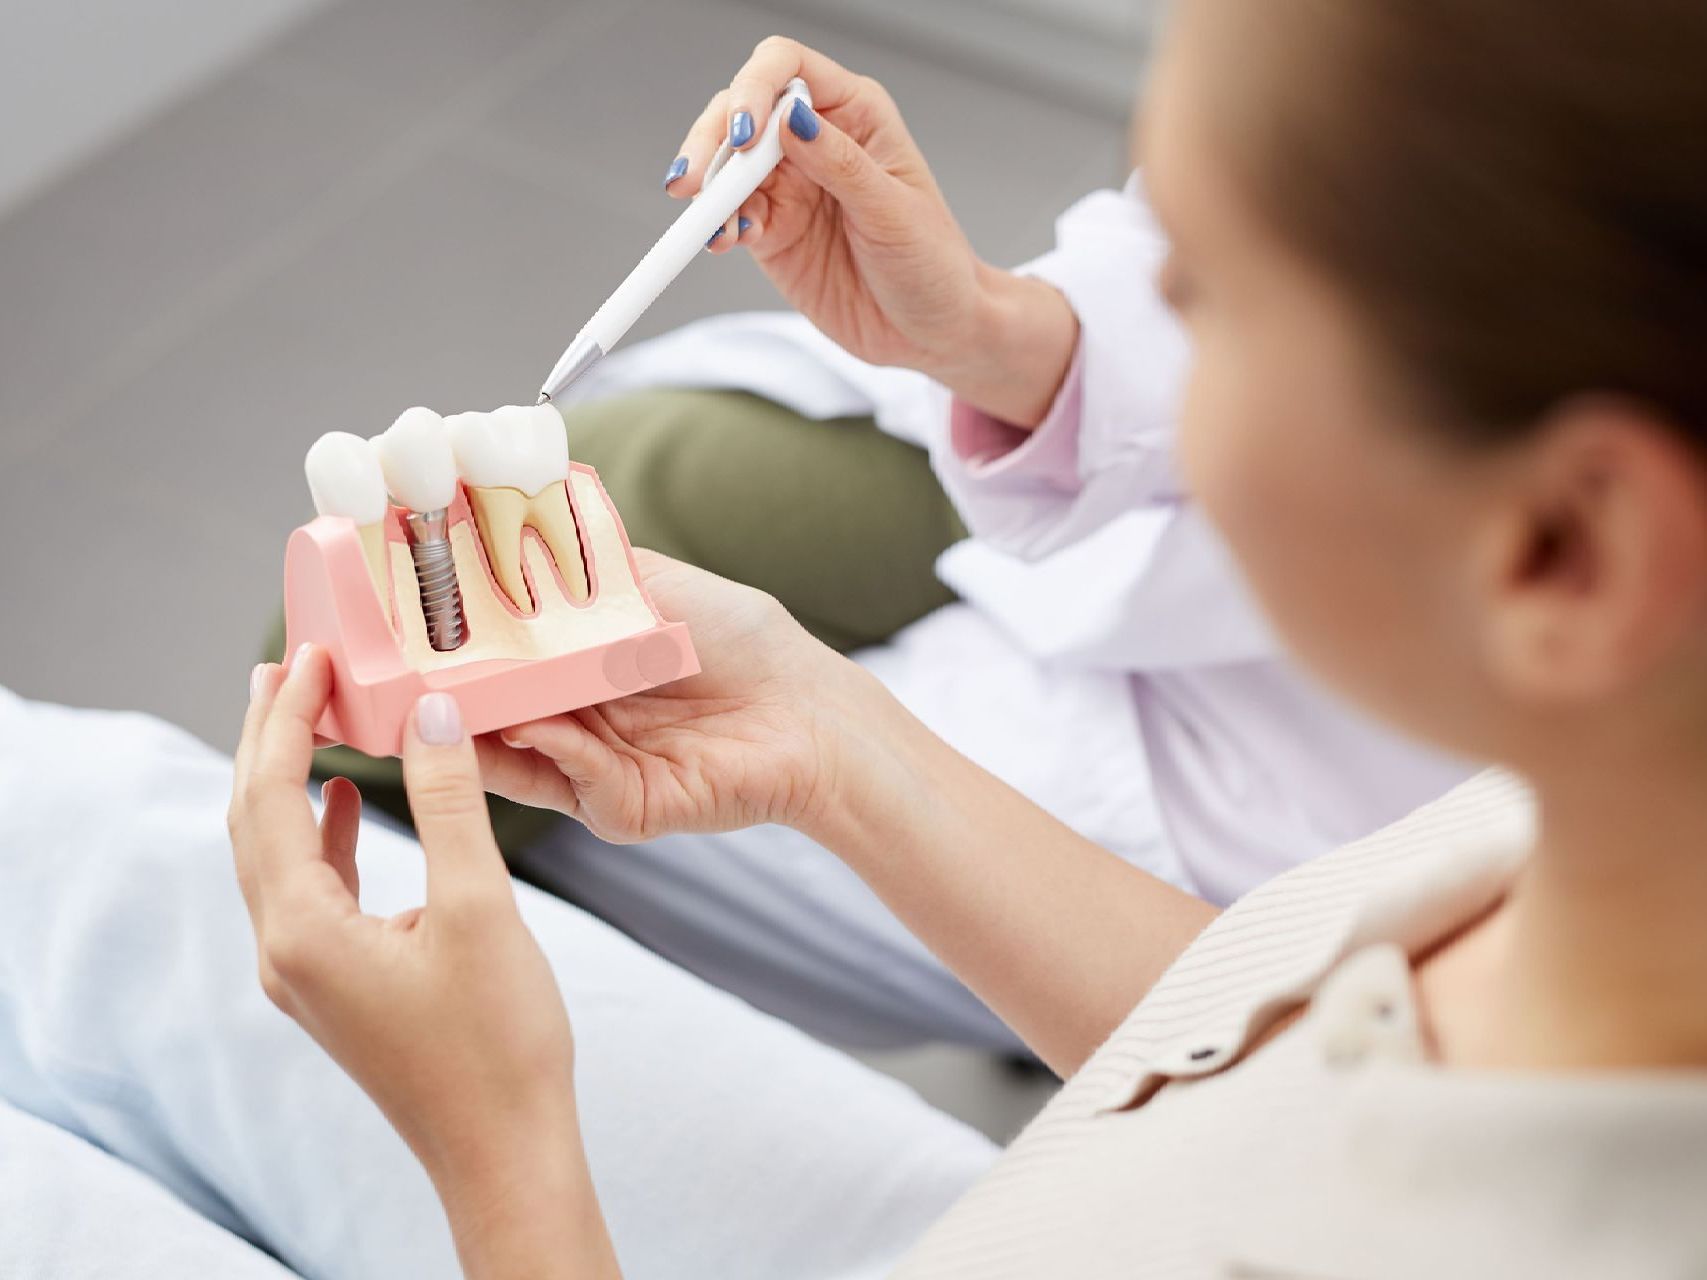 An image of a female patient holding a dental implant model while a dentist explains the model